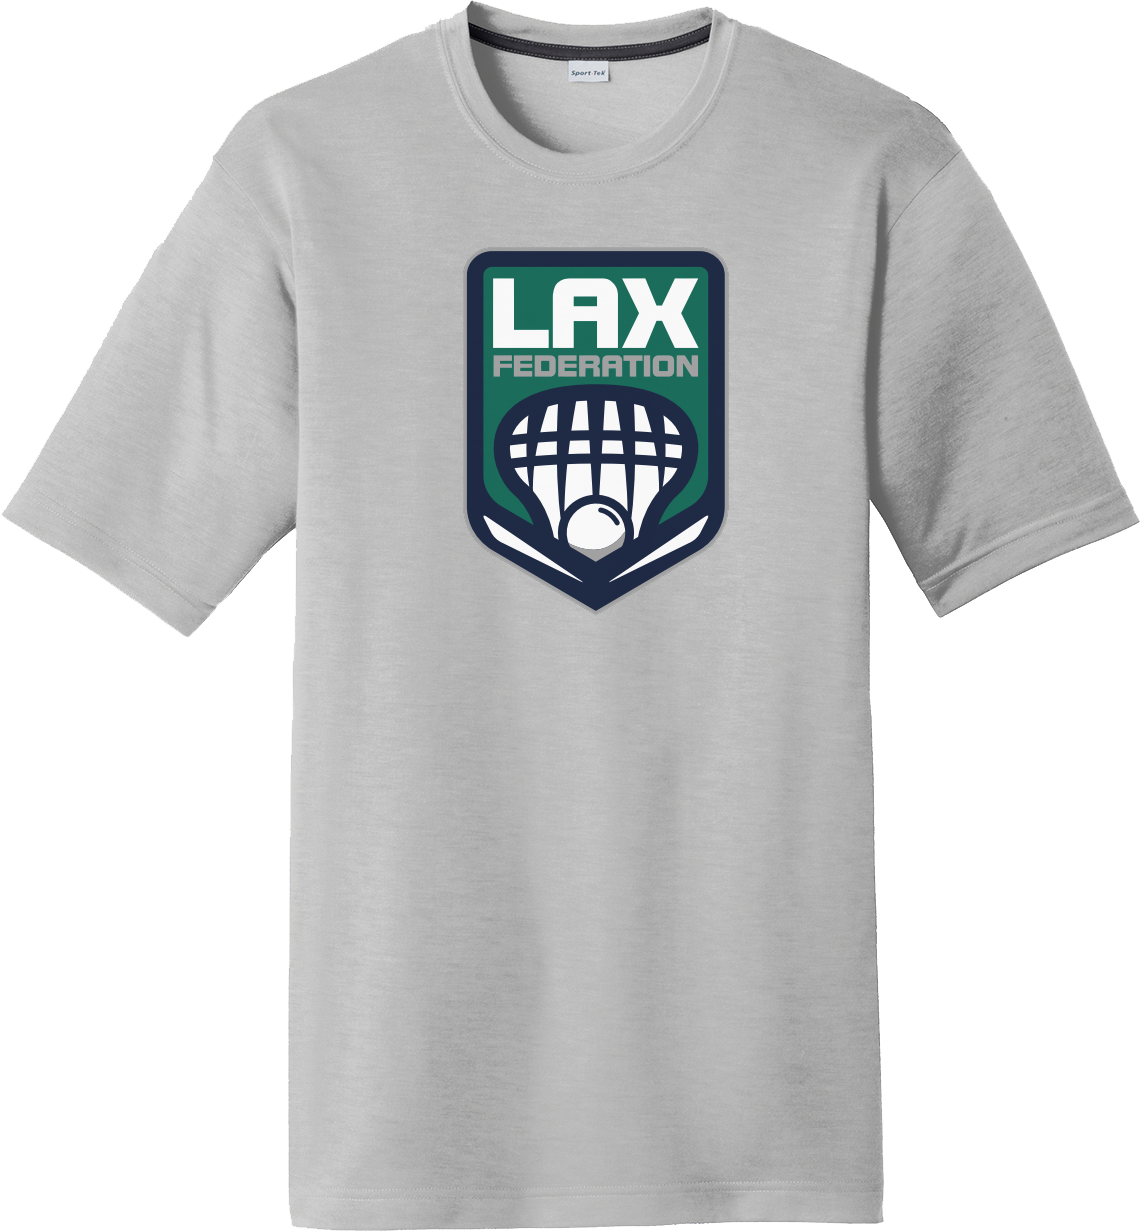 Lax Fed Silver CottonTouch Performance T-Shirt